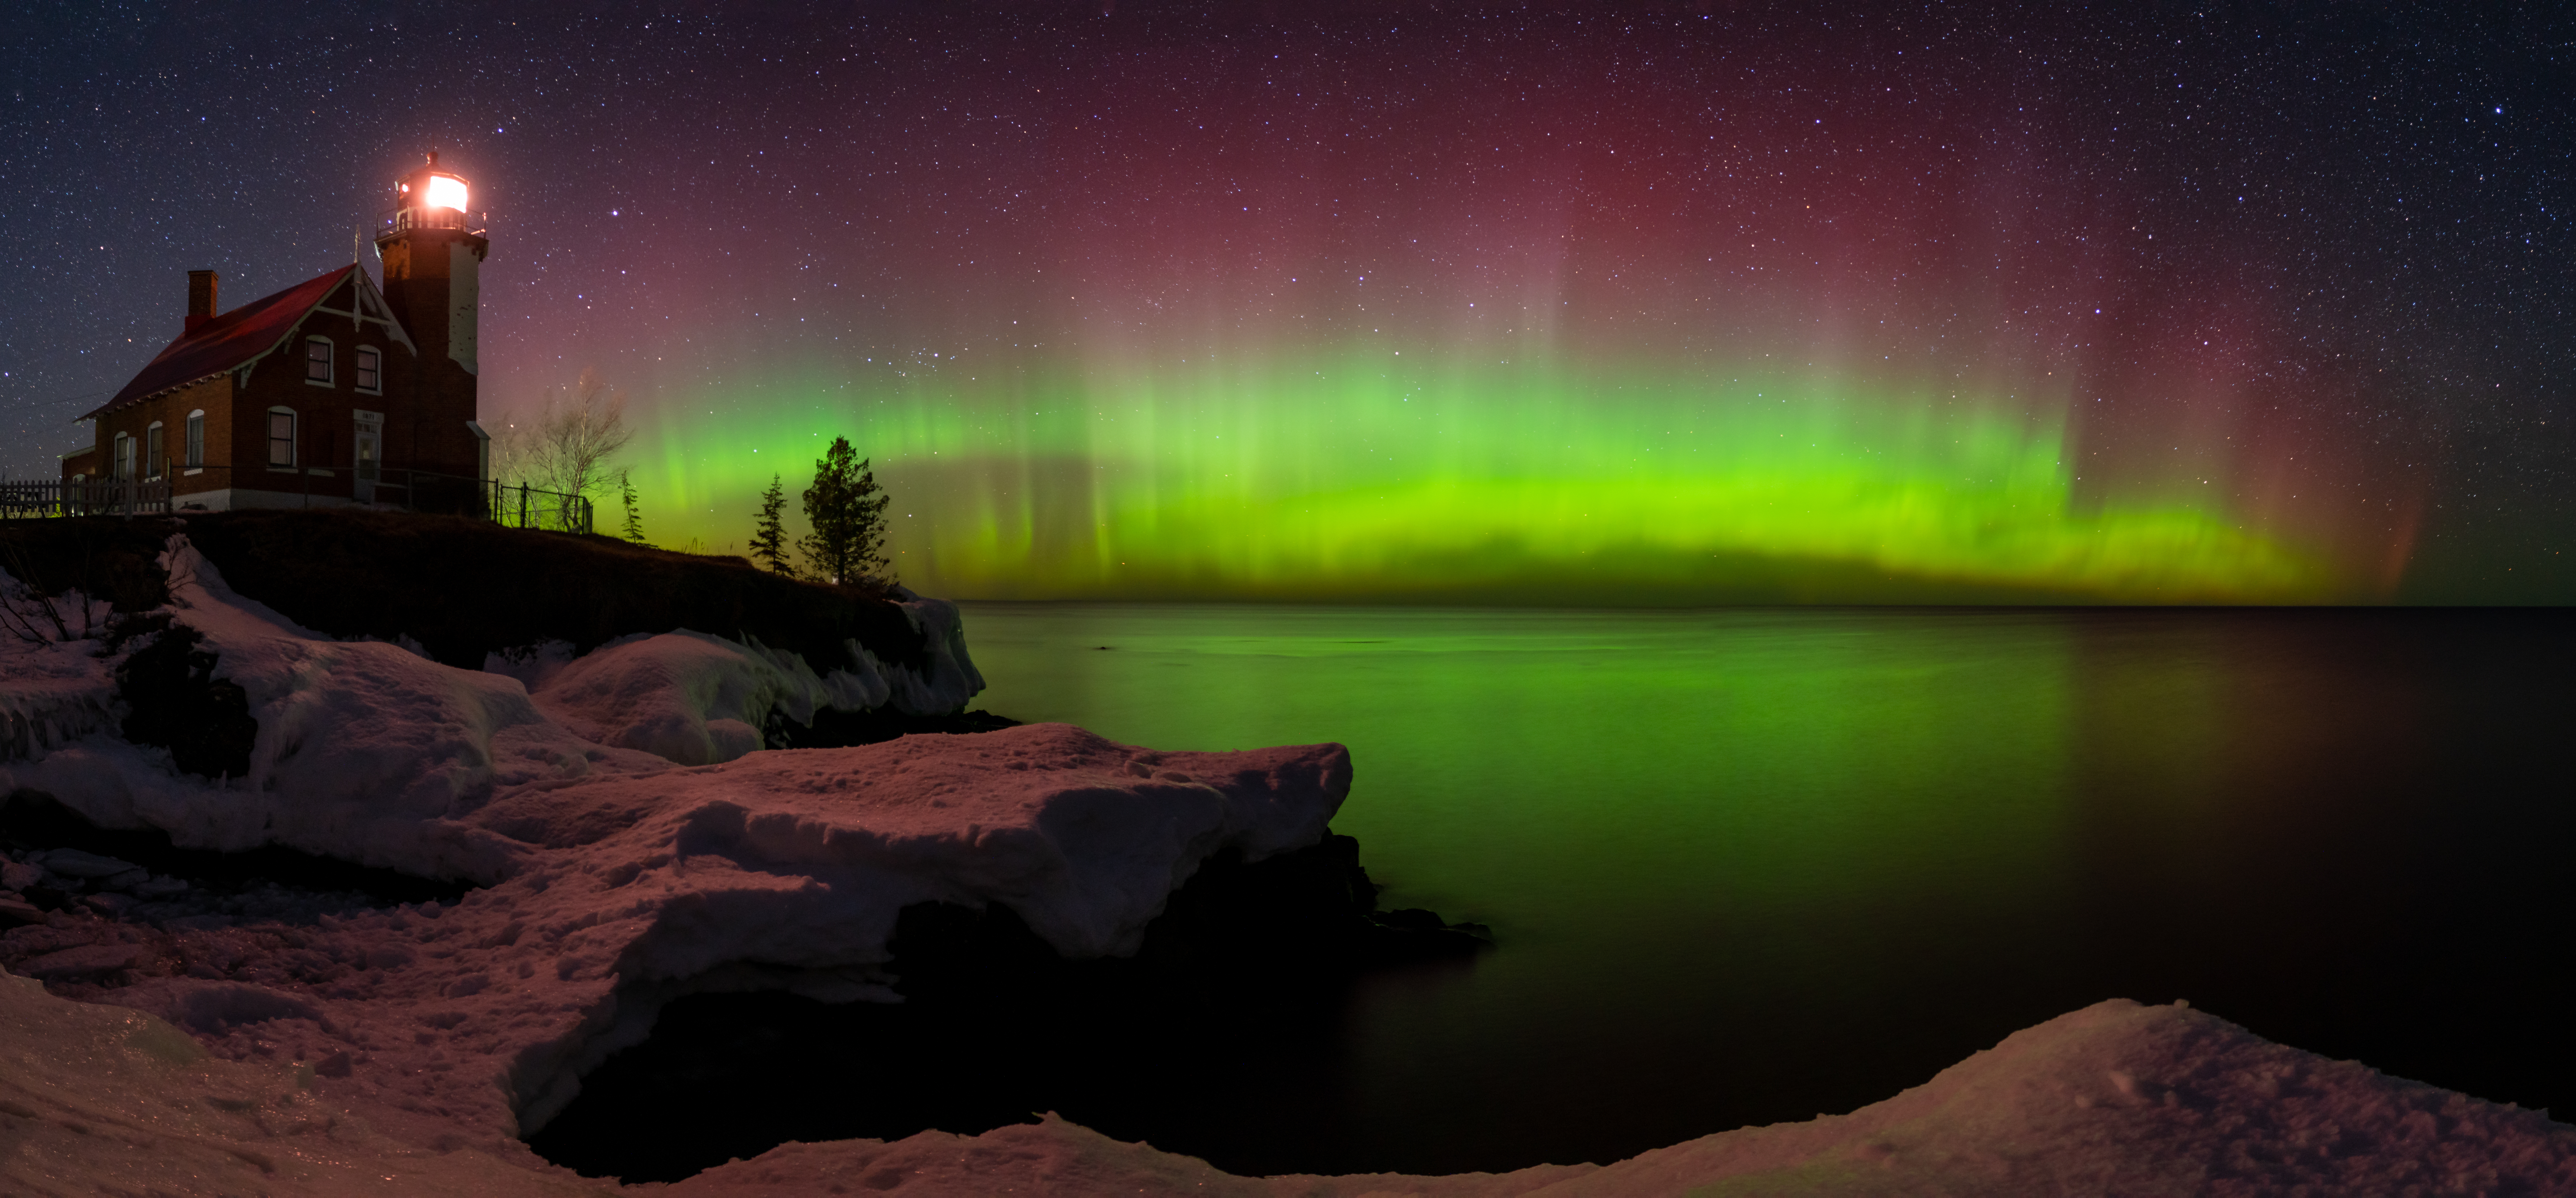 Northern Light on the night sky in Eagle Harbor, Michigan UP